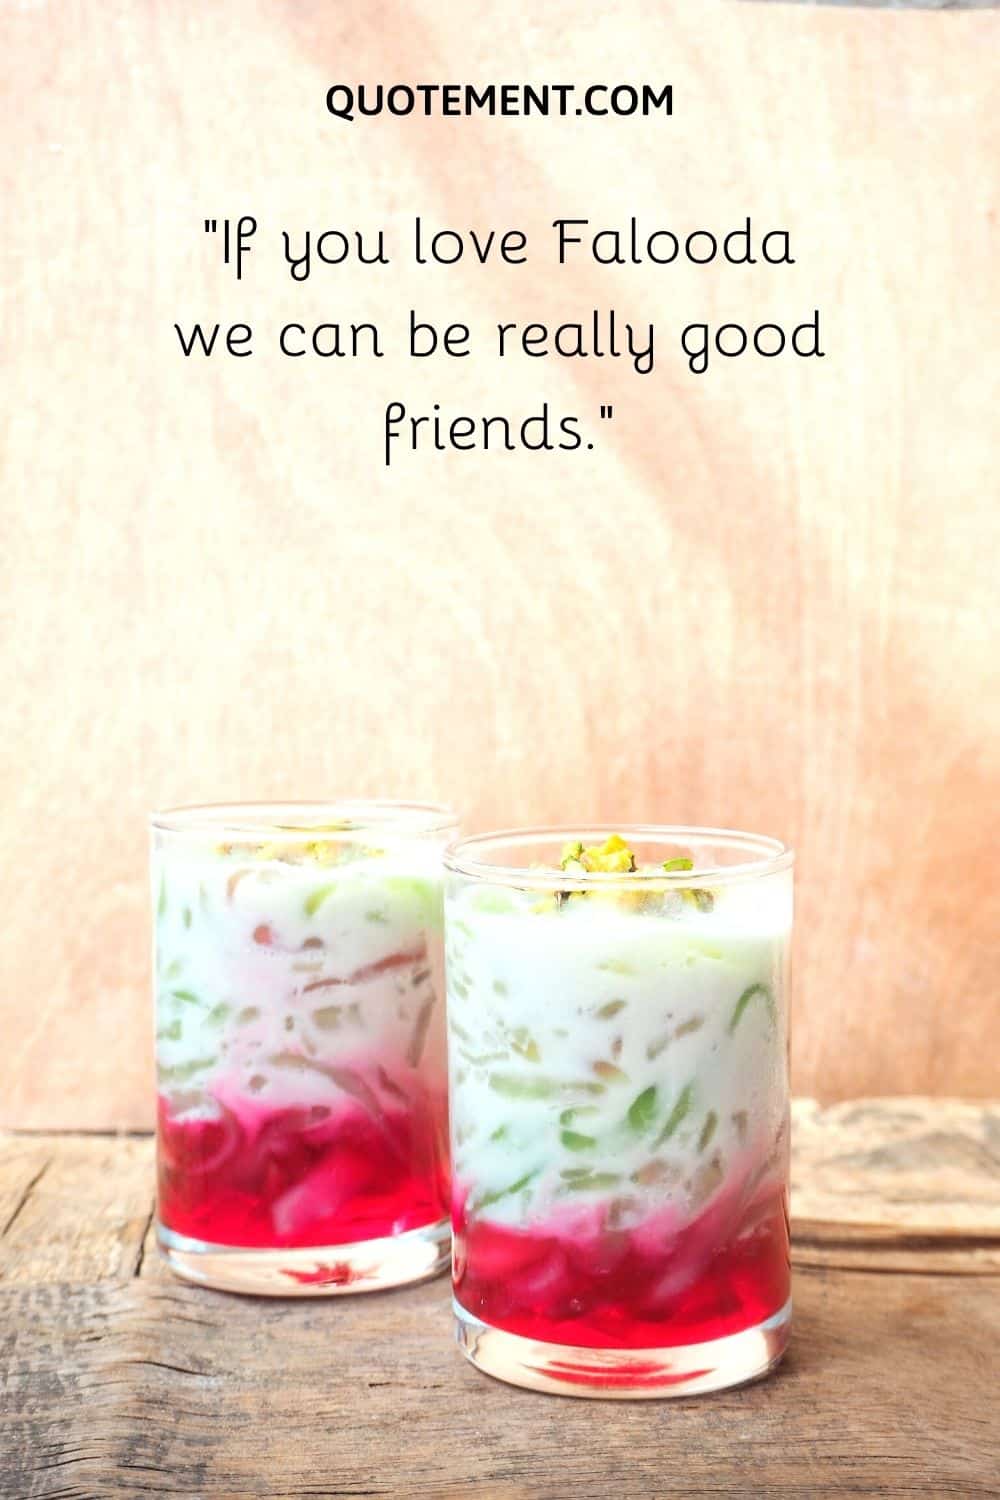 If you love Falooda we can be really good friends